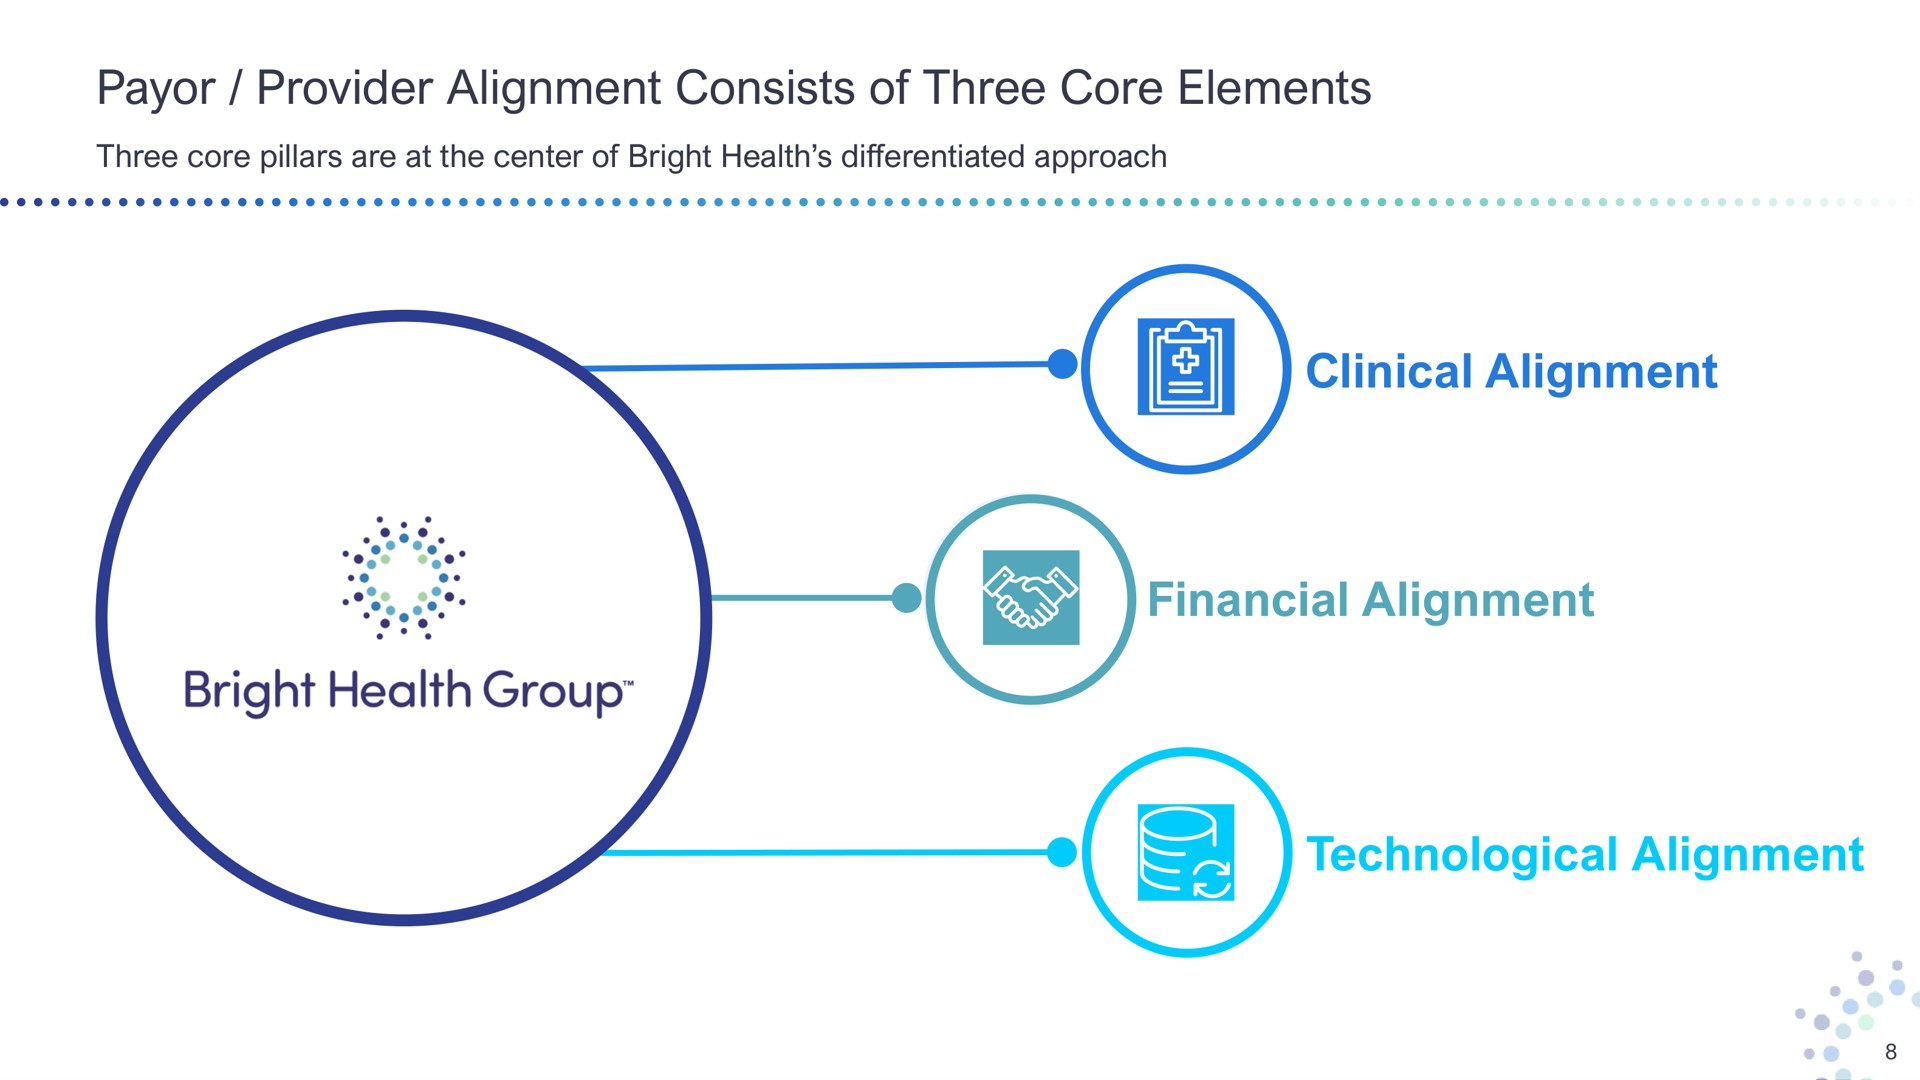 payor provider alignment consists of three core elements clinical alignment financial alignment technological alignment pillars are at the center bright health differentiated approach bright health group | Bright Health Group